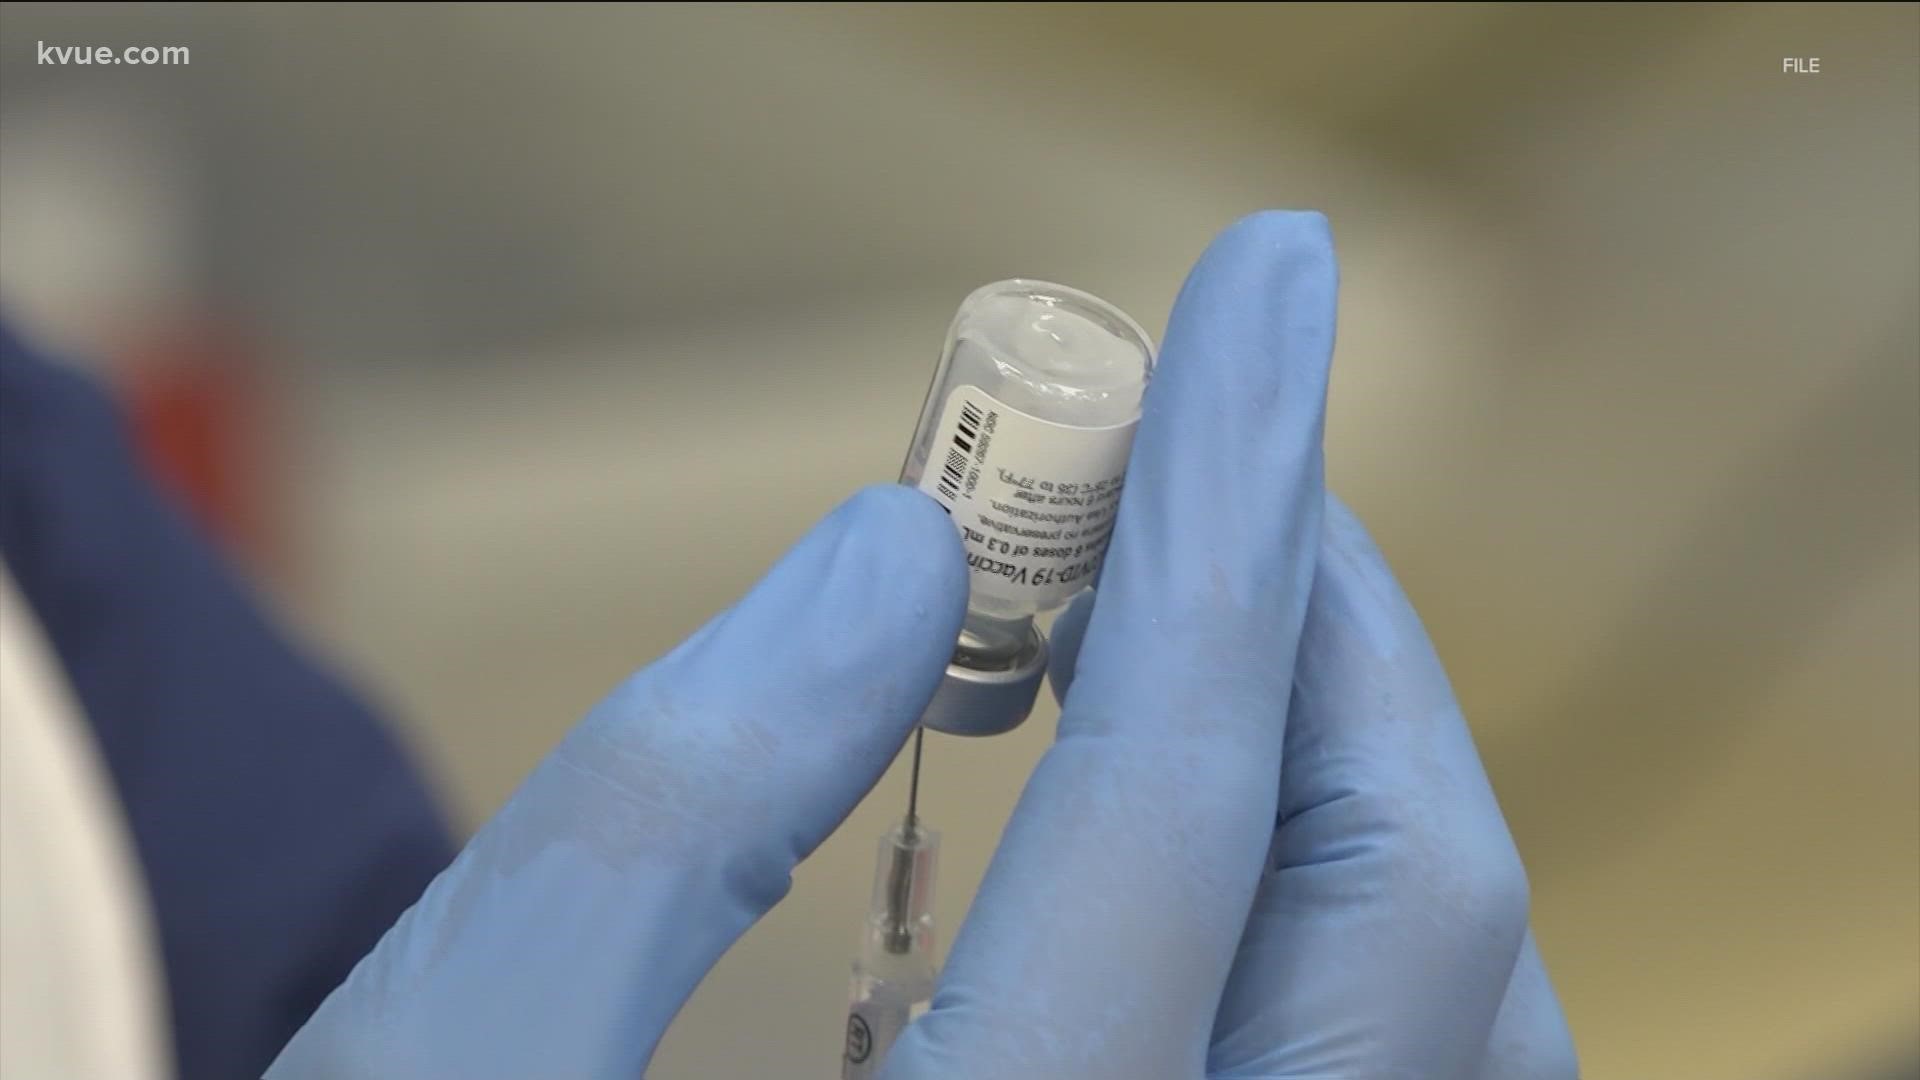 The Texas Senate could soon vote on a bill banning COVID-19 vaccine mandates. KVUE's Bryce Newberry has the latest on the bill moving through the Texas Legislature.